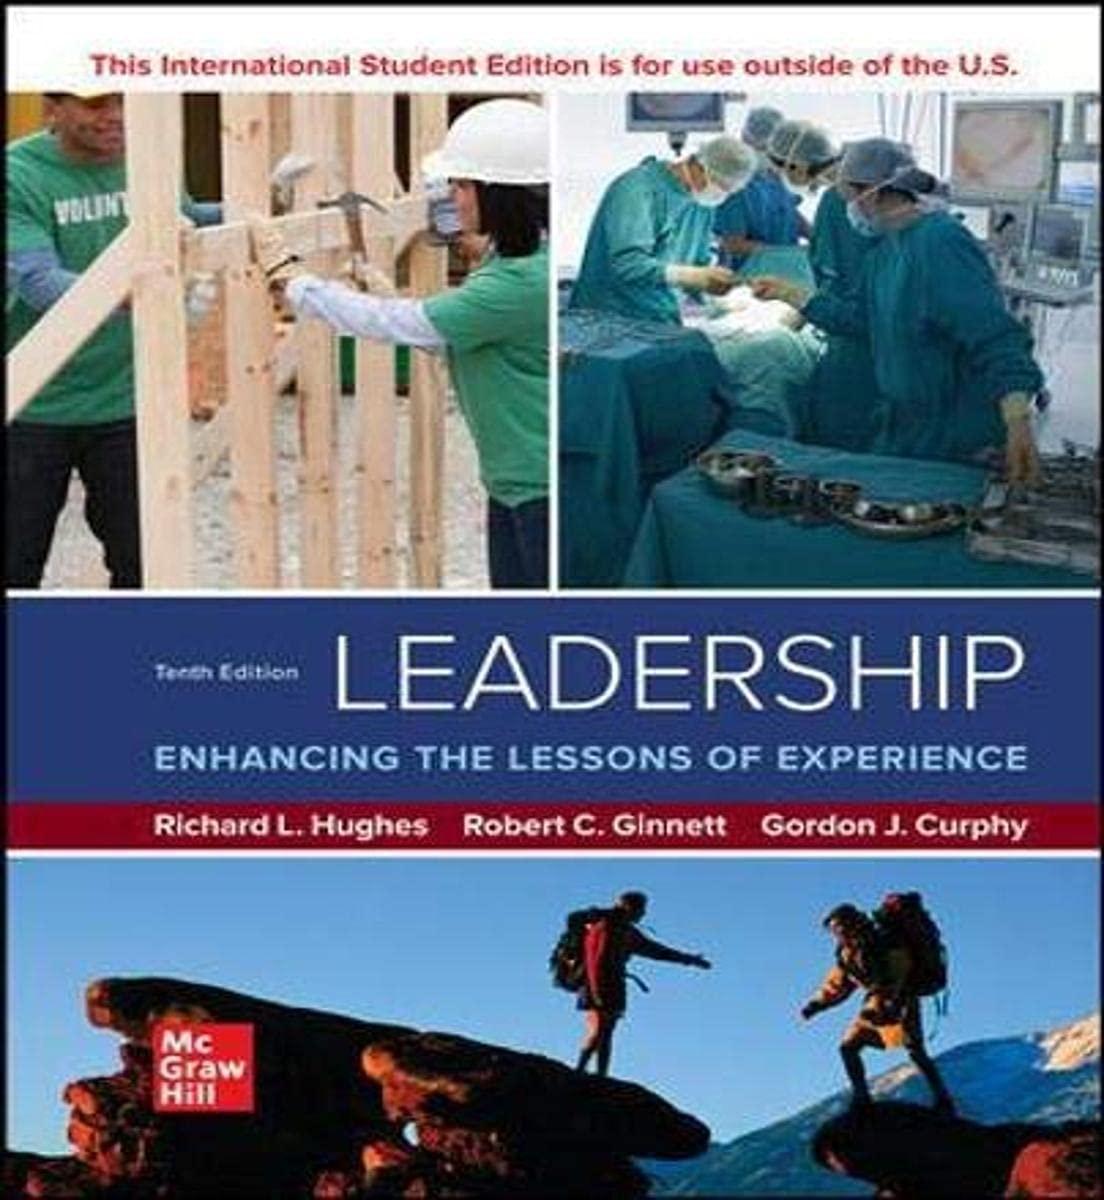 leadership enhancing the lessons of experience ise 10th international edition richard l. hughes, robert c.